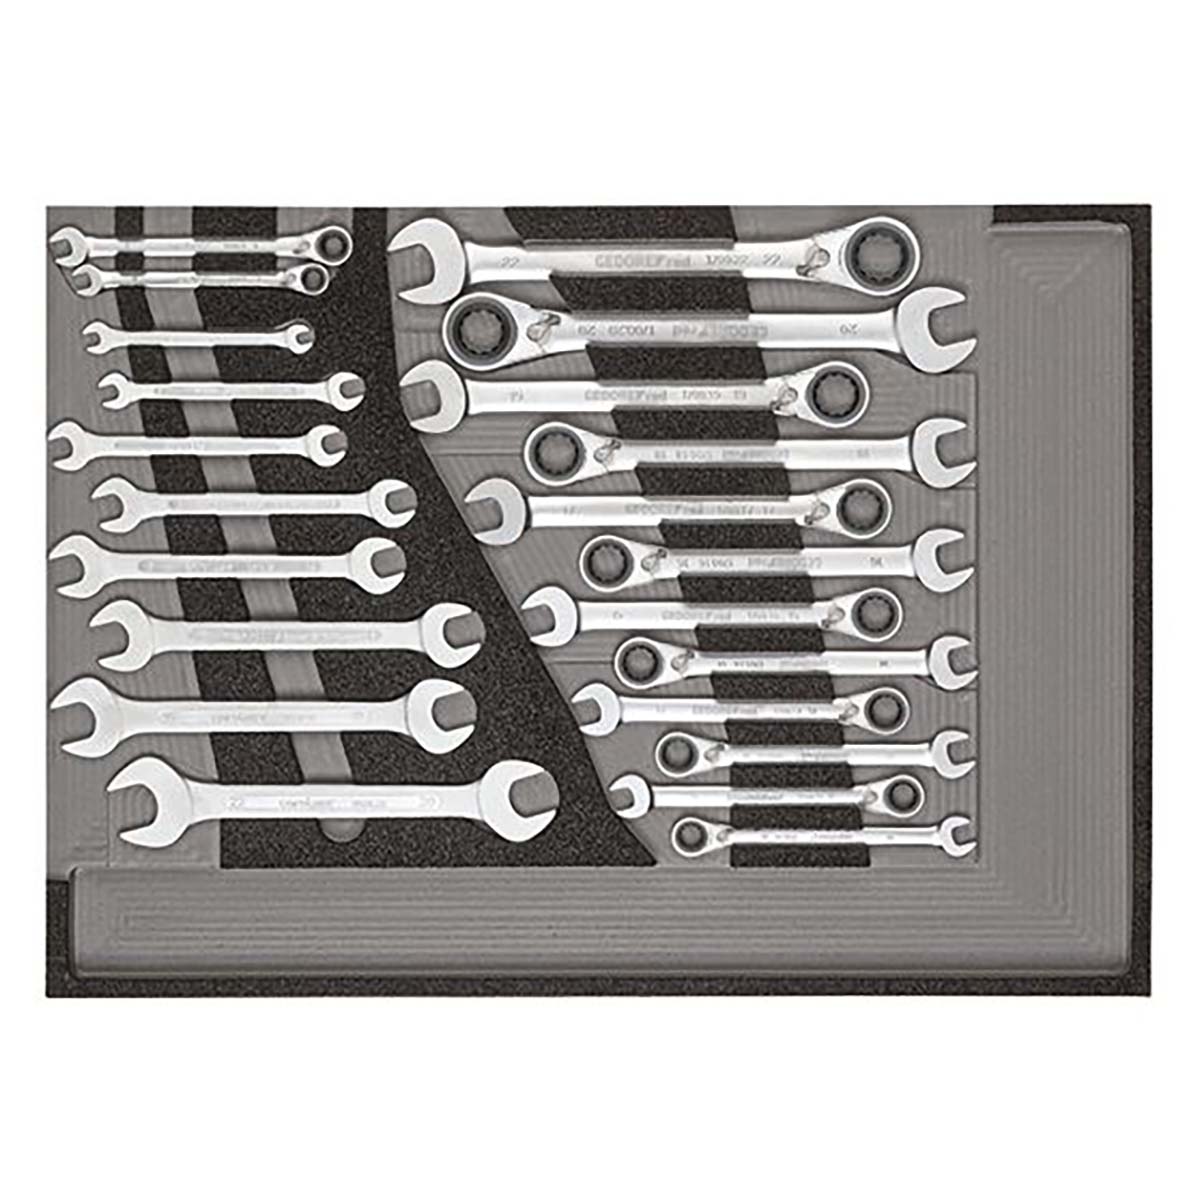 GEDORE red R21010004 - Tool set in 3 plastic modules, 129 pieces (3301679)